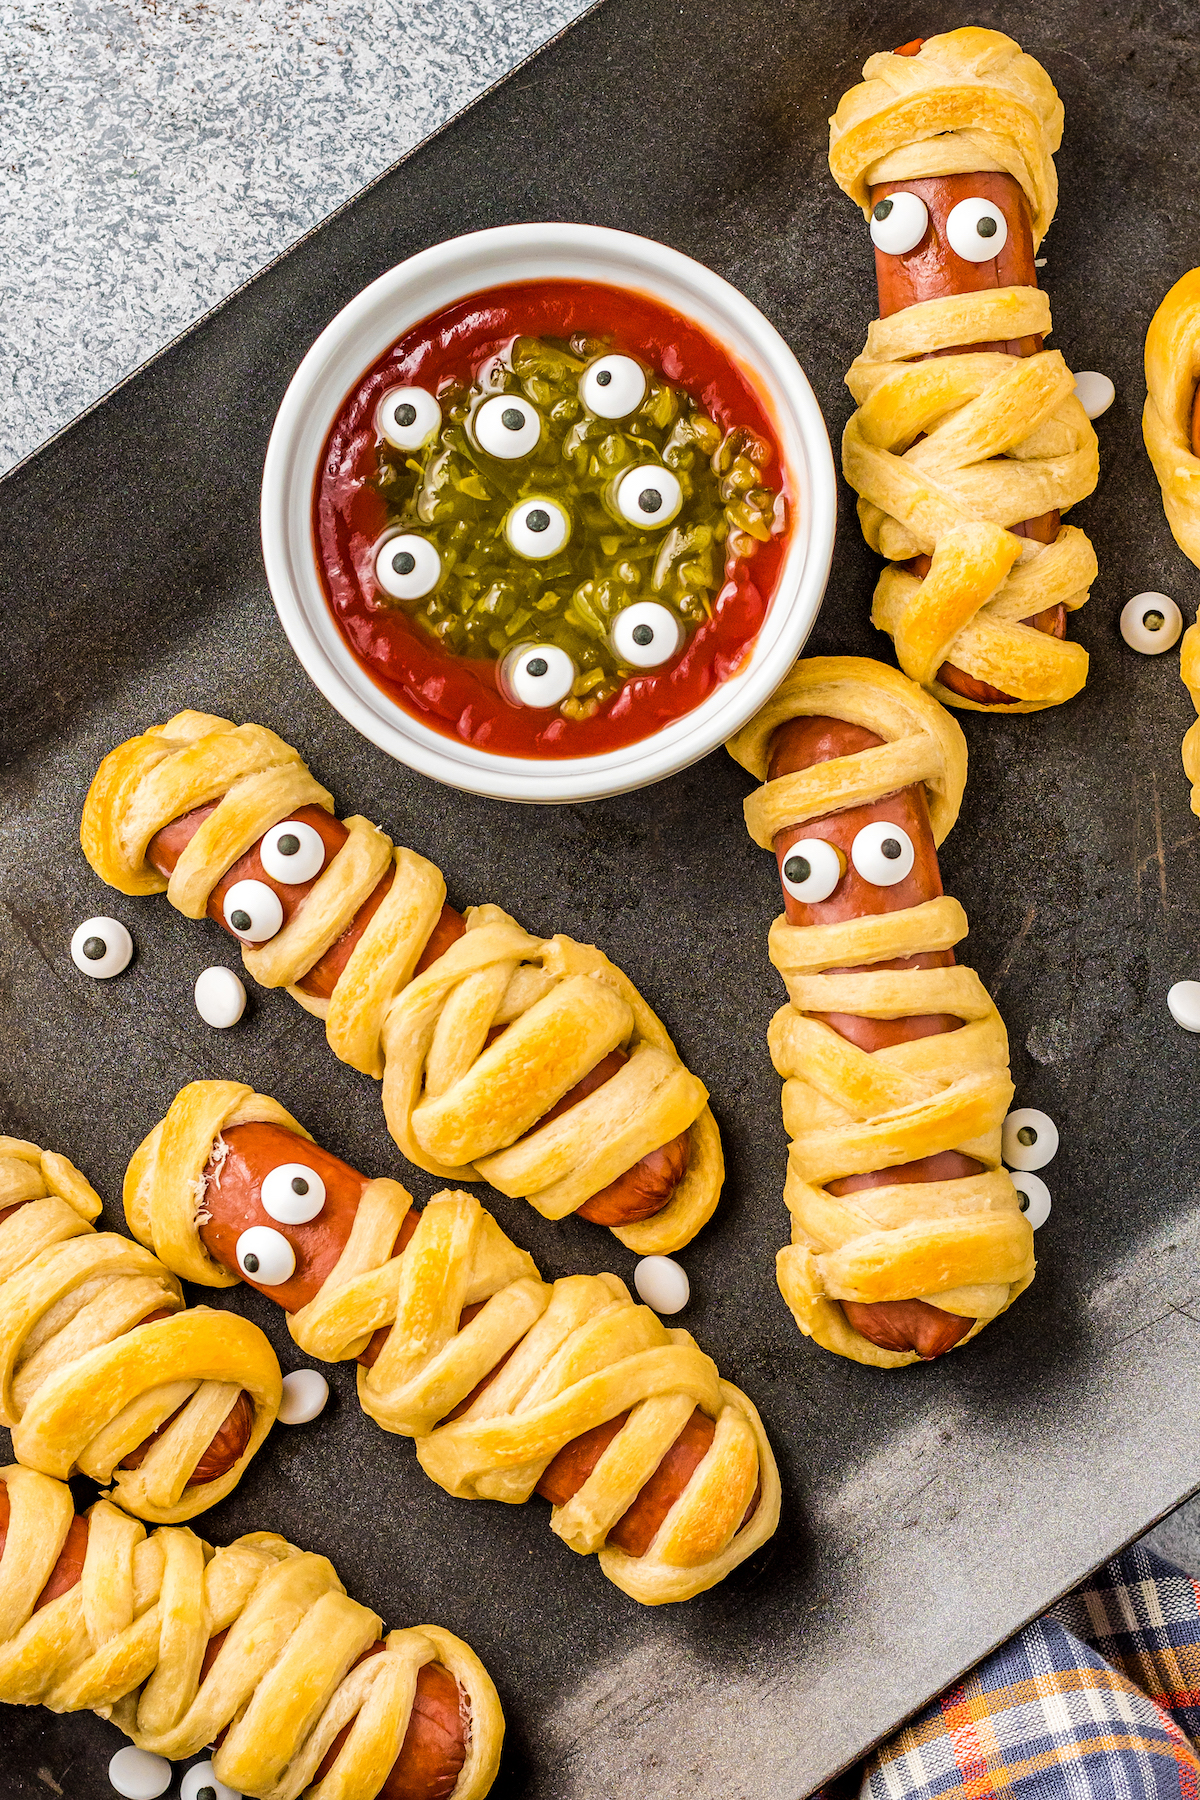 Mummy hot dogs on a baking tray with monster dip.